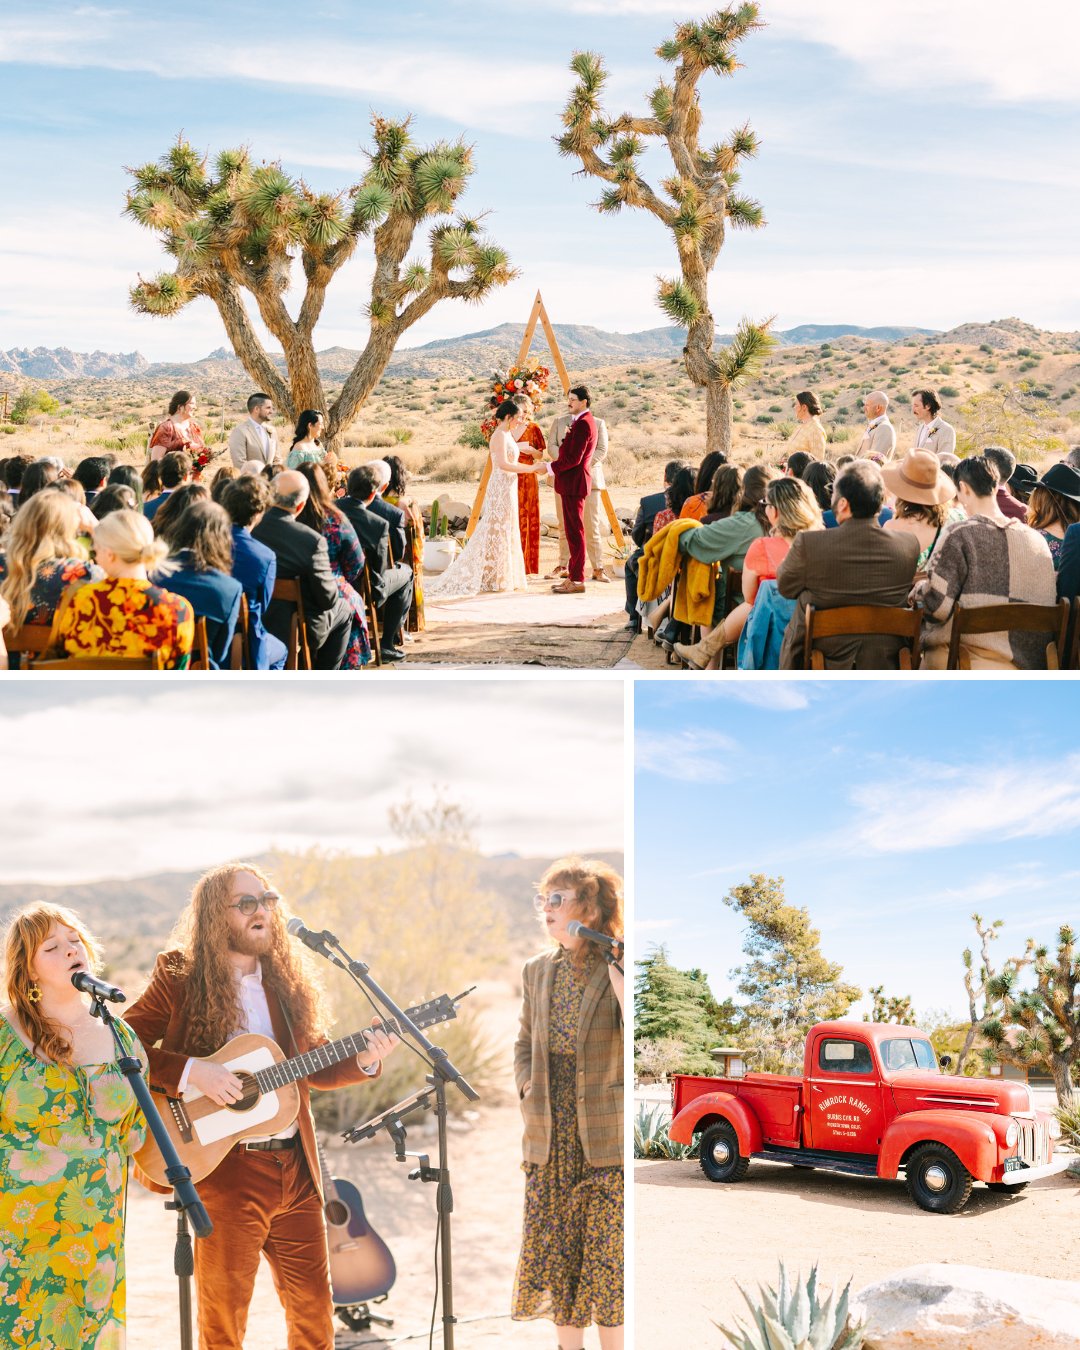 Rustic wedding ceremony at a Joshua Tree, surrounded by cacti and mountains in the distance.